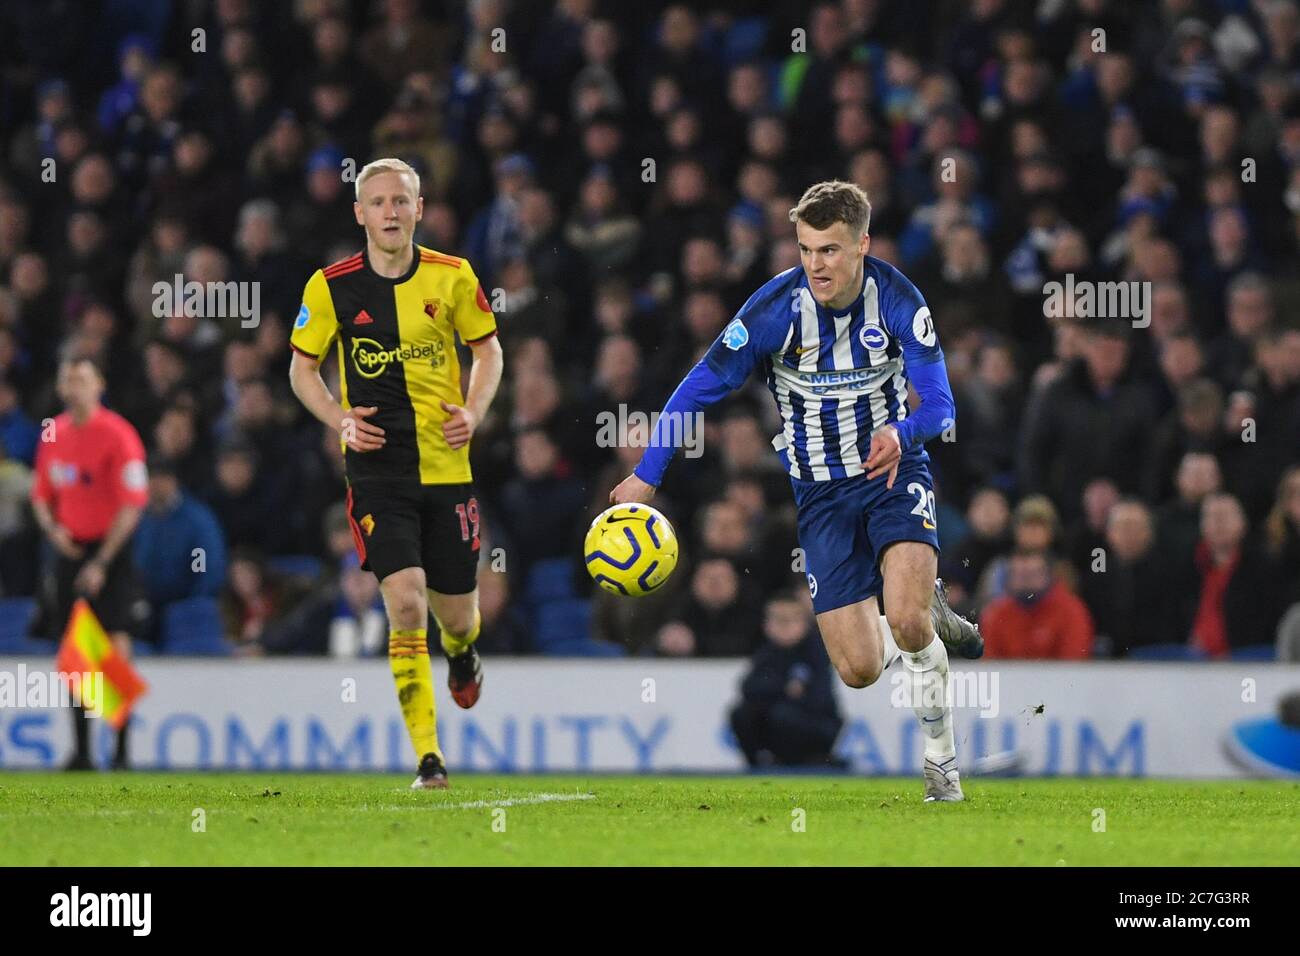 8th February 2020, American Express Community Stadium, Brighton and Hove, England; Premier League, Brighton and Hove Albion v Watford :Solly March (20) of Brighton & Hove Albion FC makes a run with the ball Stock Photo